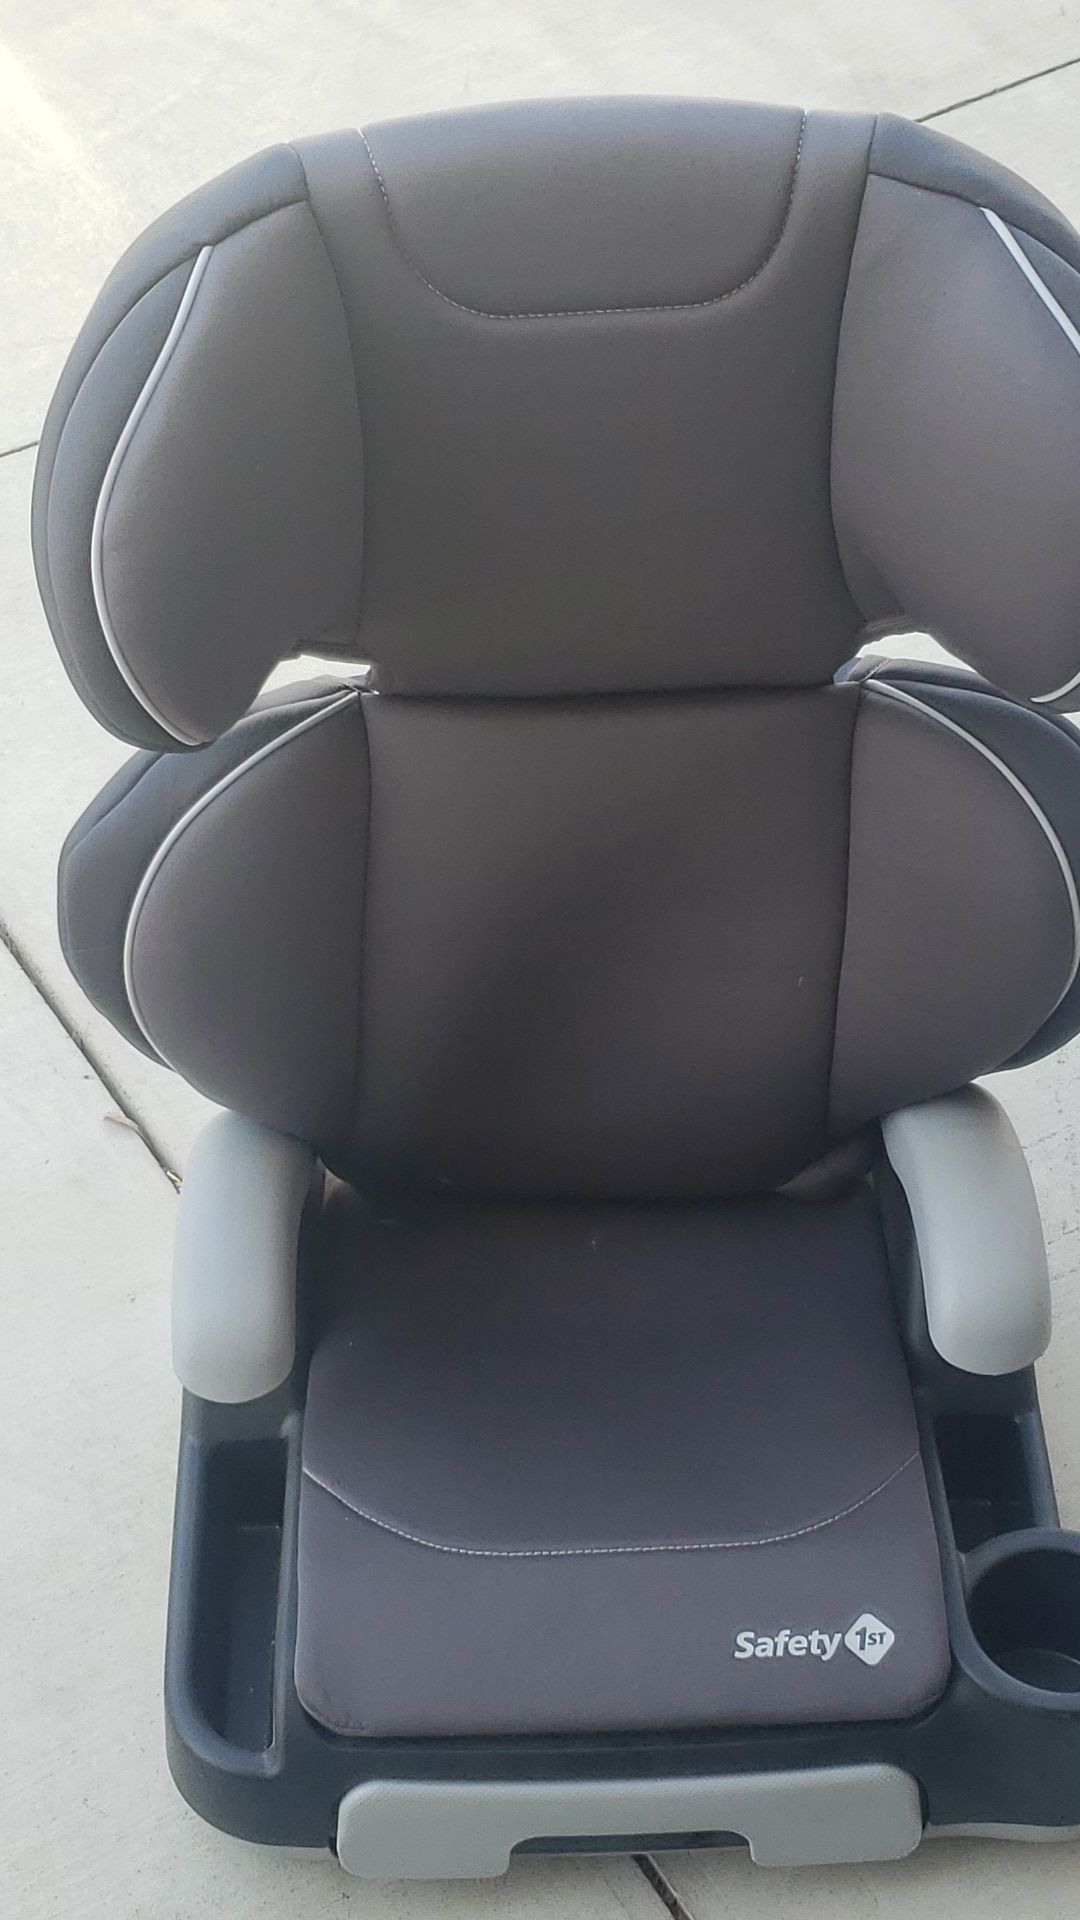 Safety 1st child booster seat.